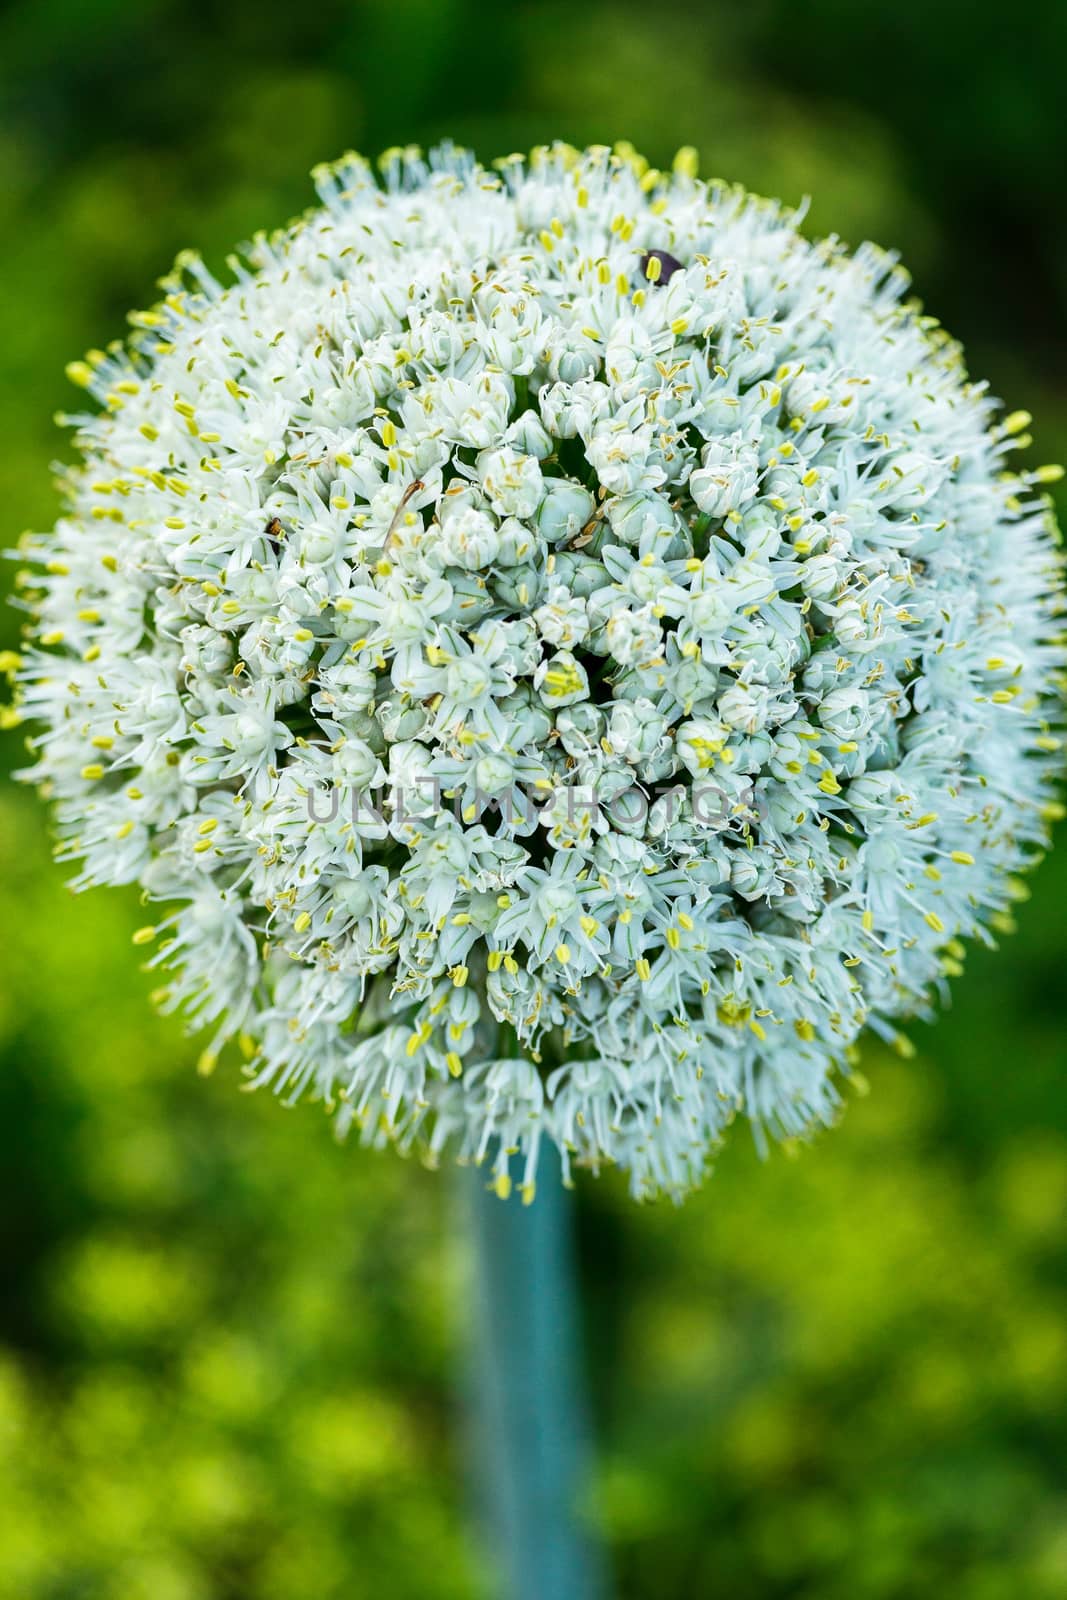 White flower with dense petals forming the shape of a sphere with small yellow points of stamens. It looks very beautiful and unusual.